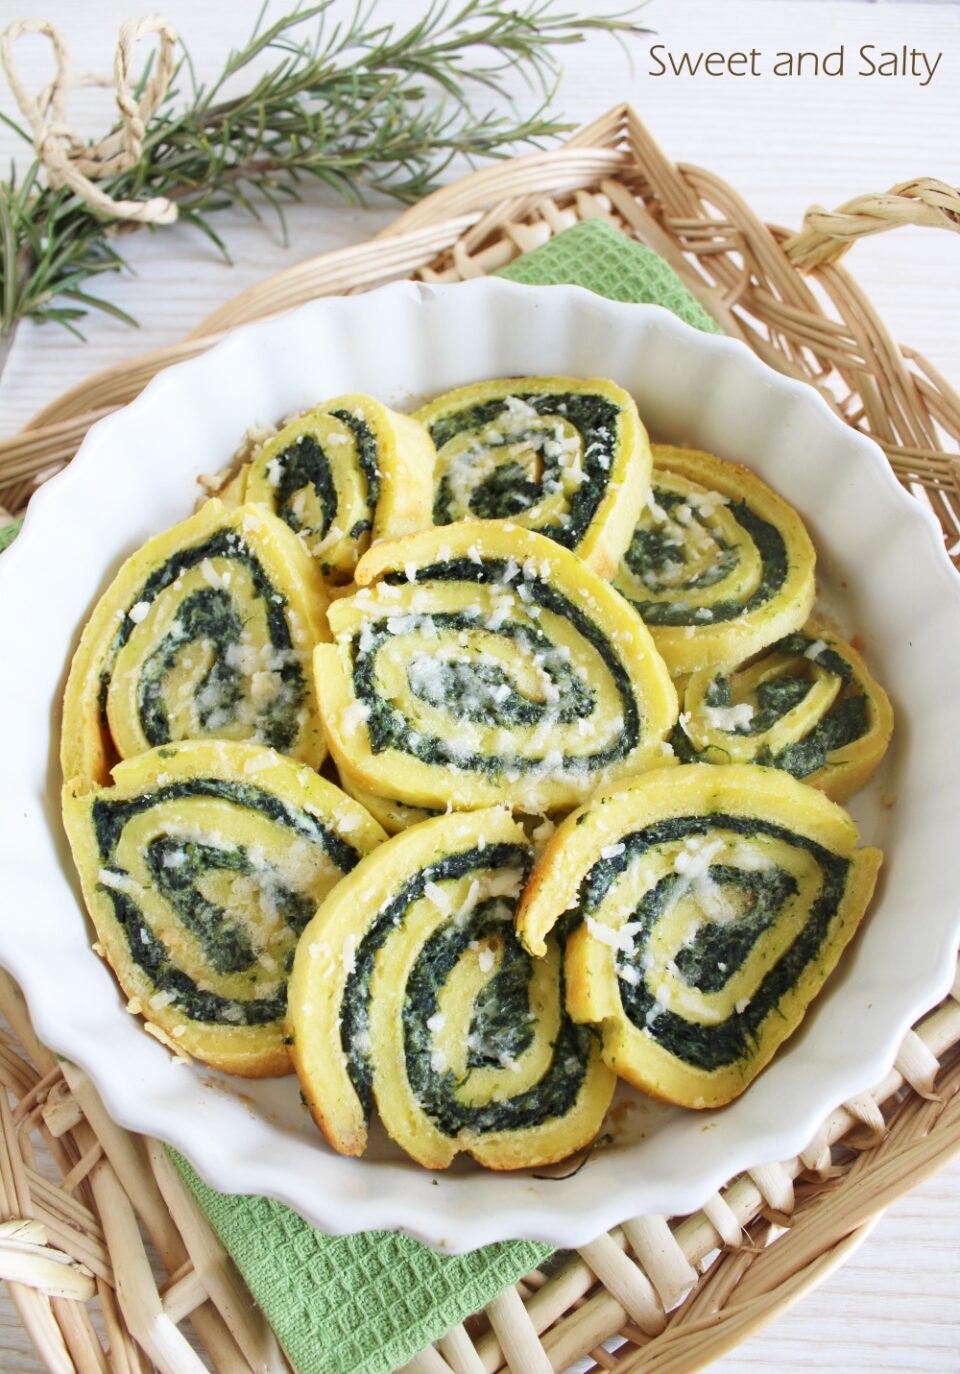 Potato Roll with Spinach and Ricotta